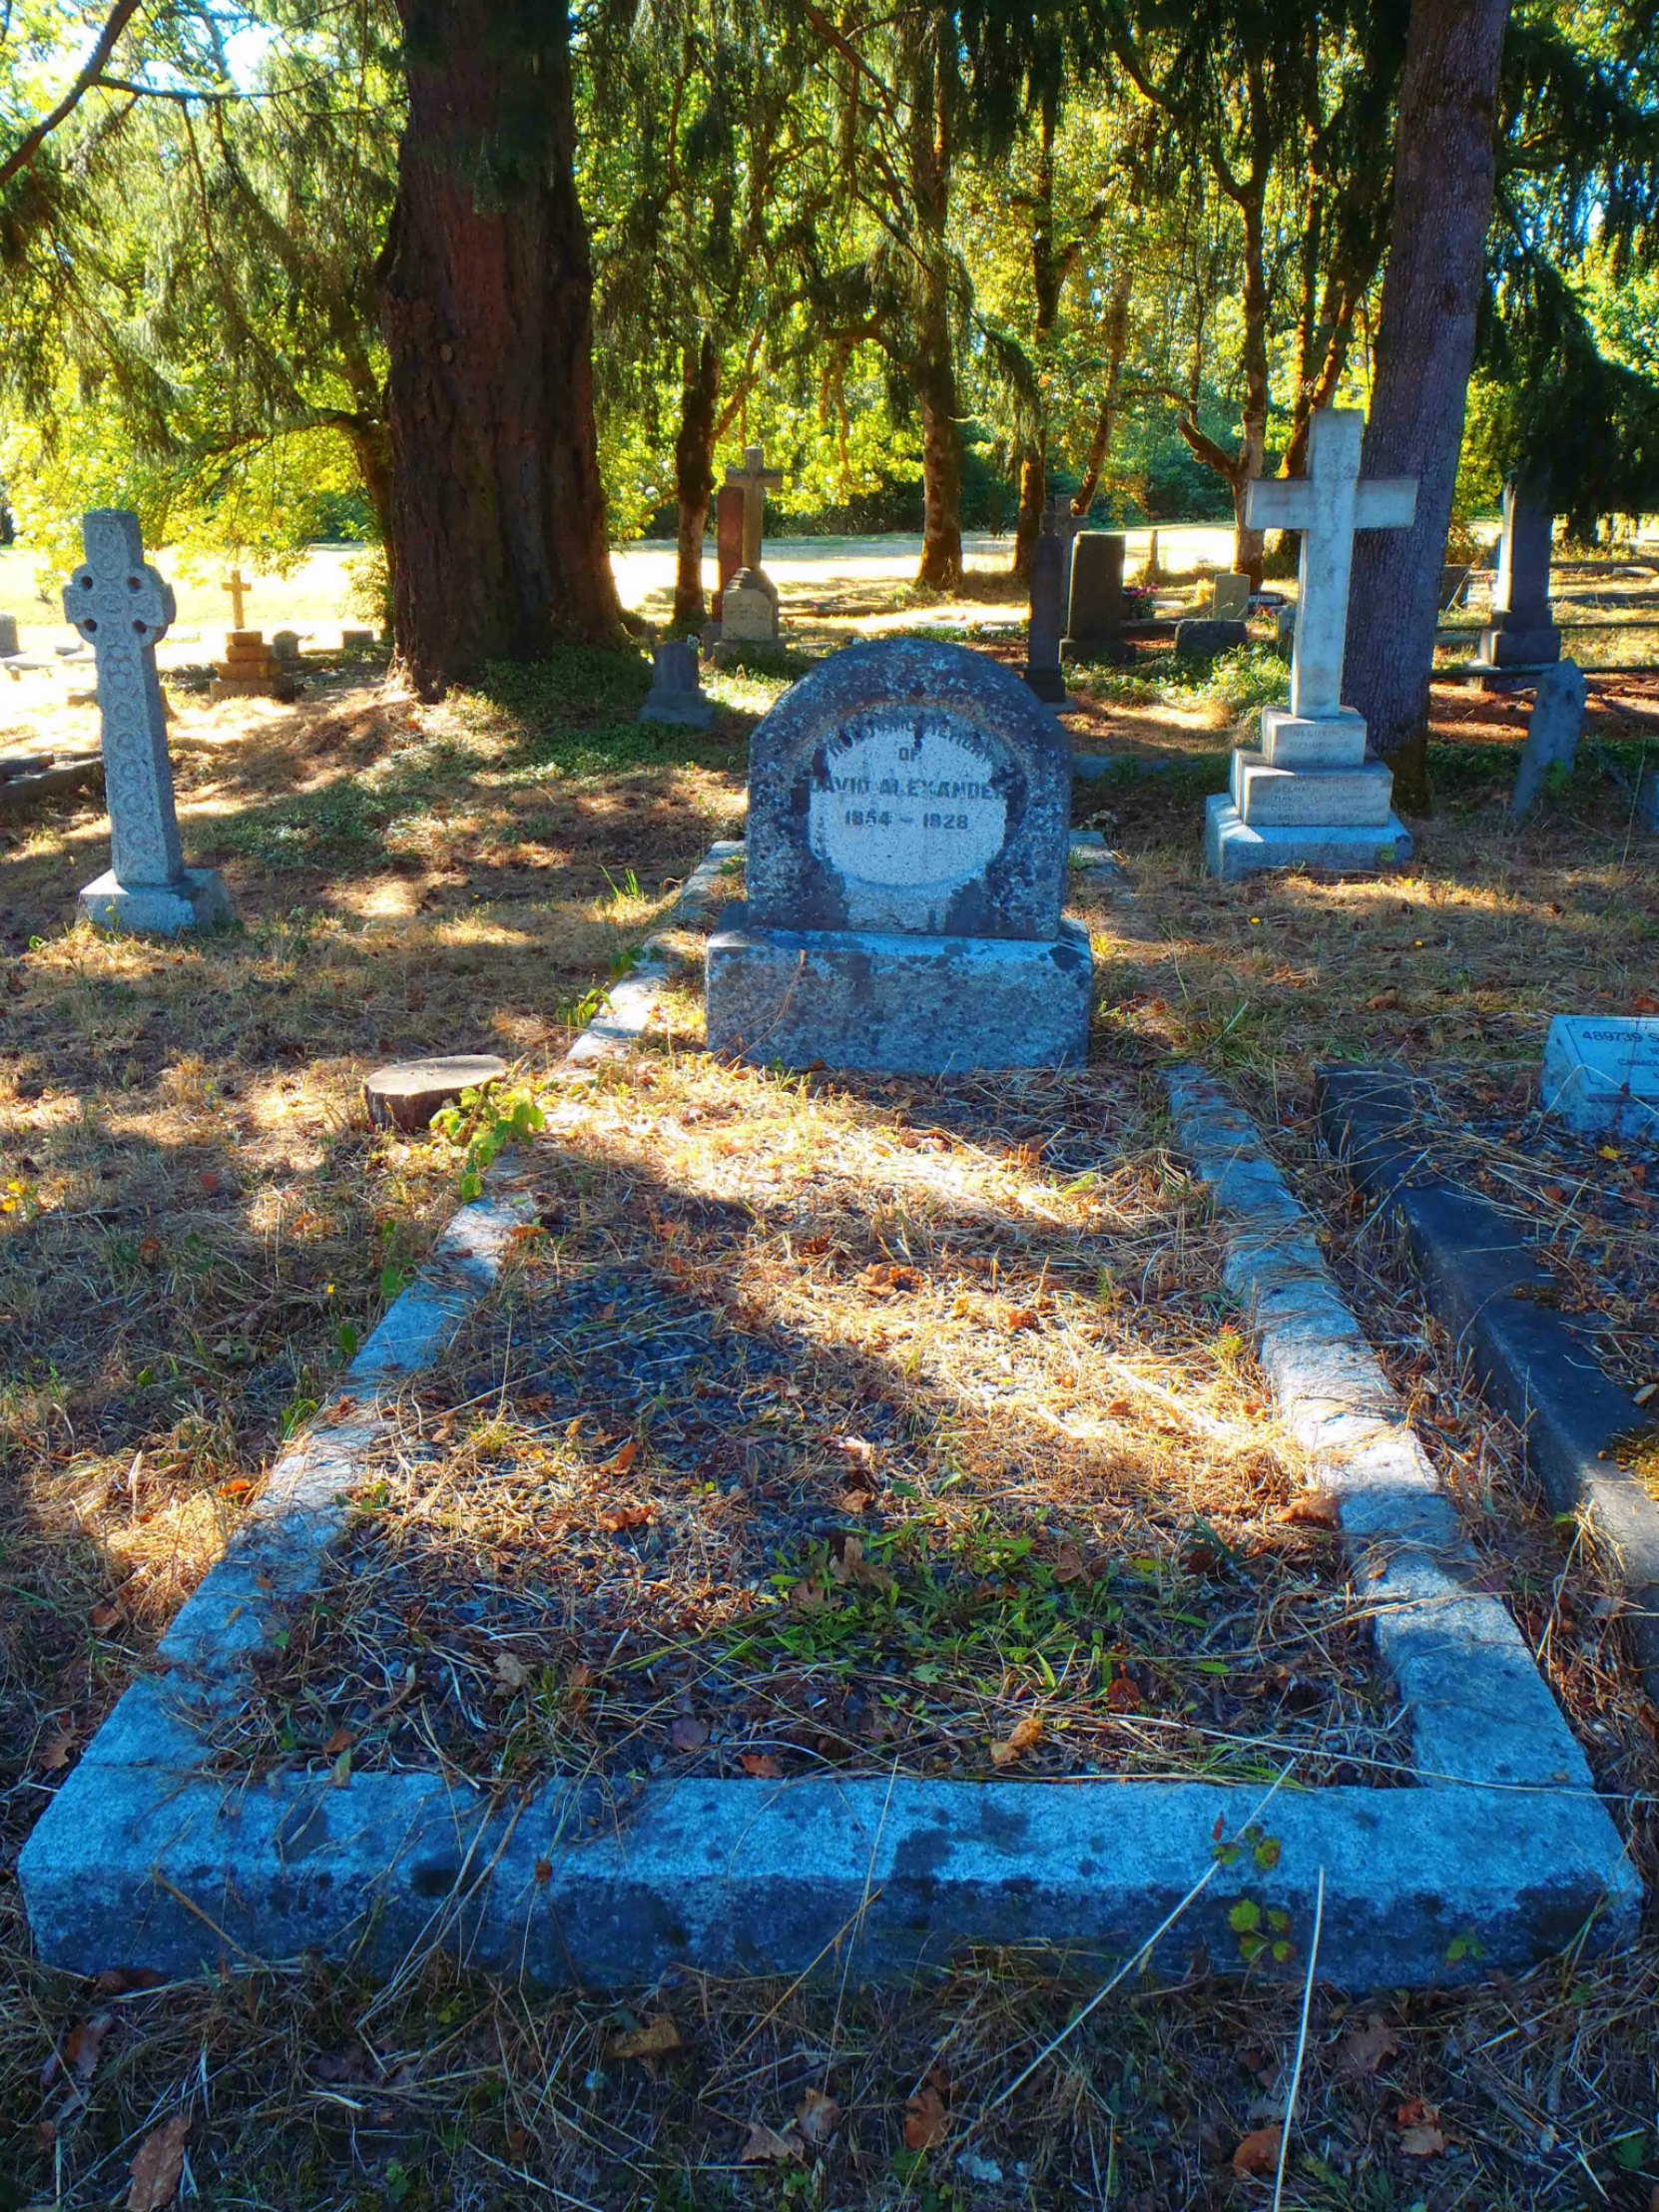 David Alexander grave, St. Peter's Quamichan Anglican cemetery